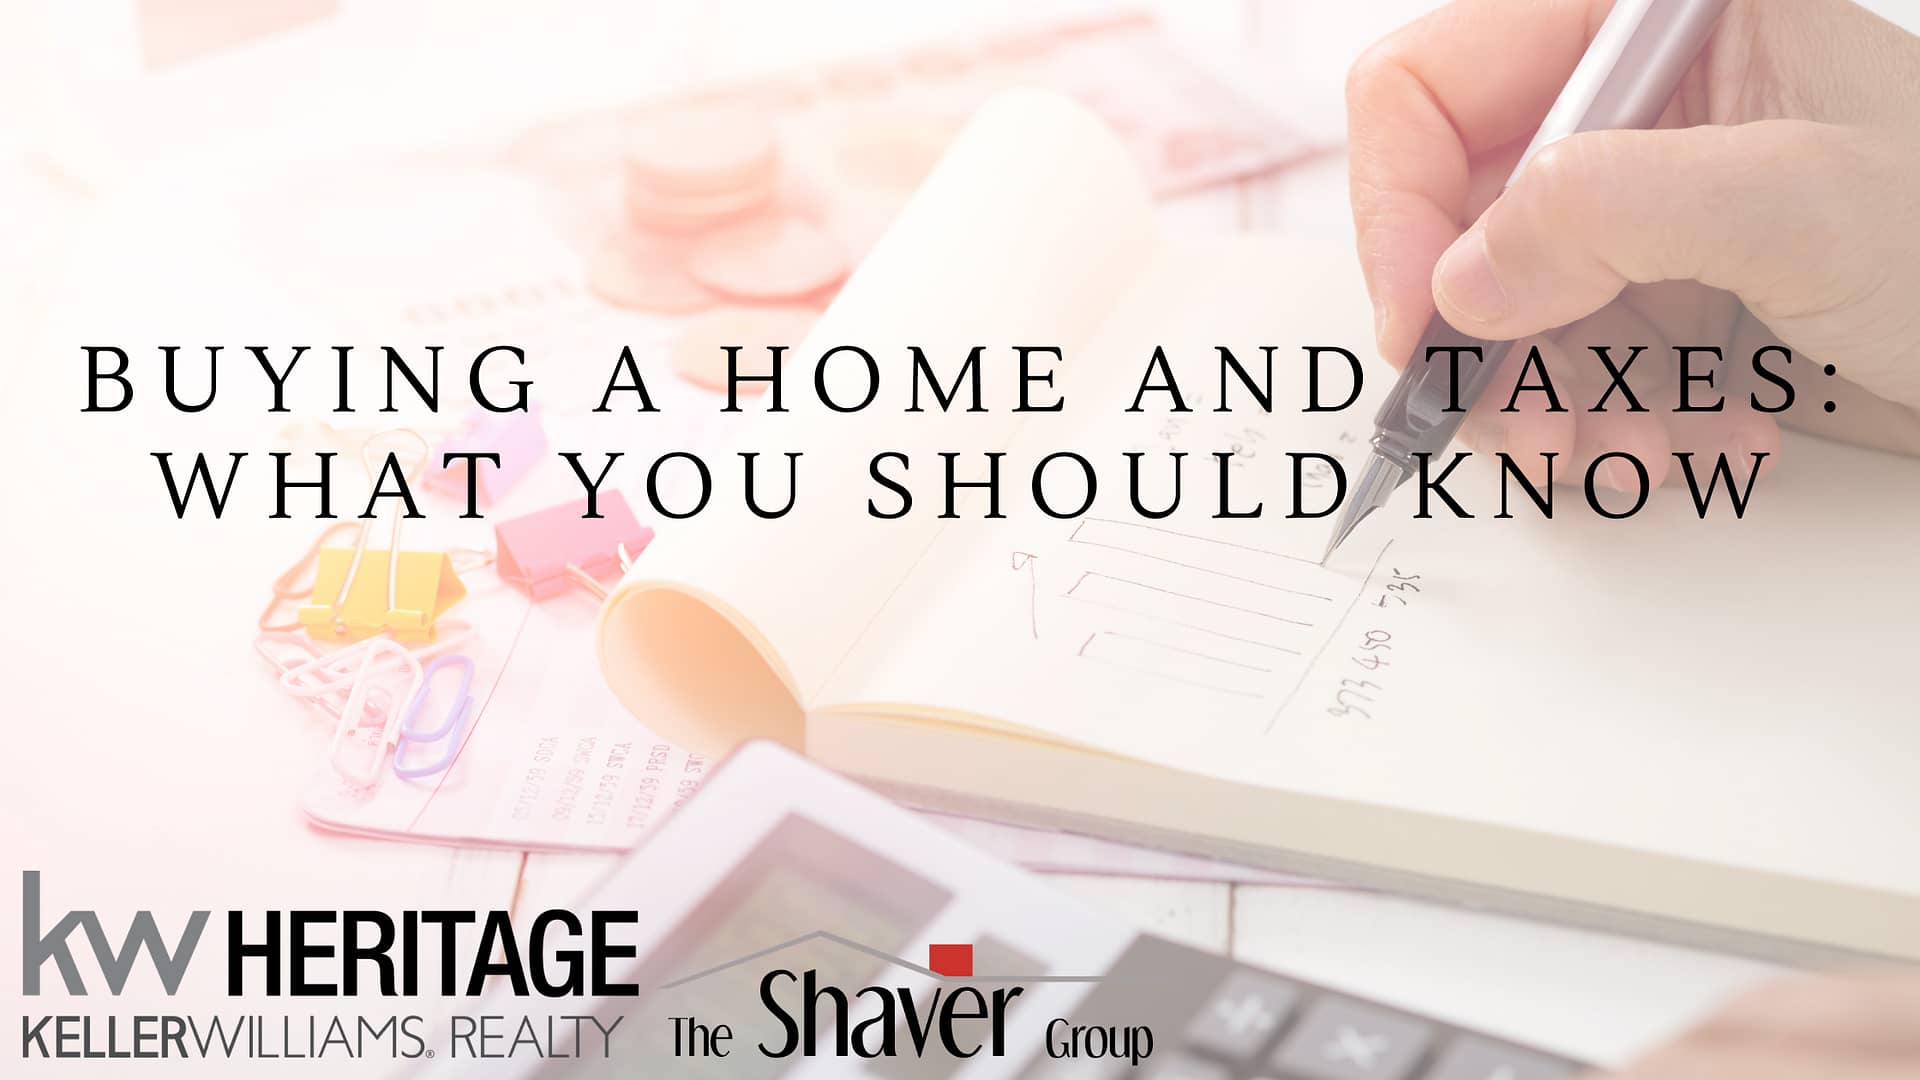 BUYING A HOME AND TAXES: WHAT YOU SHOULD KNOW